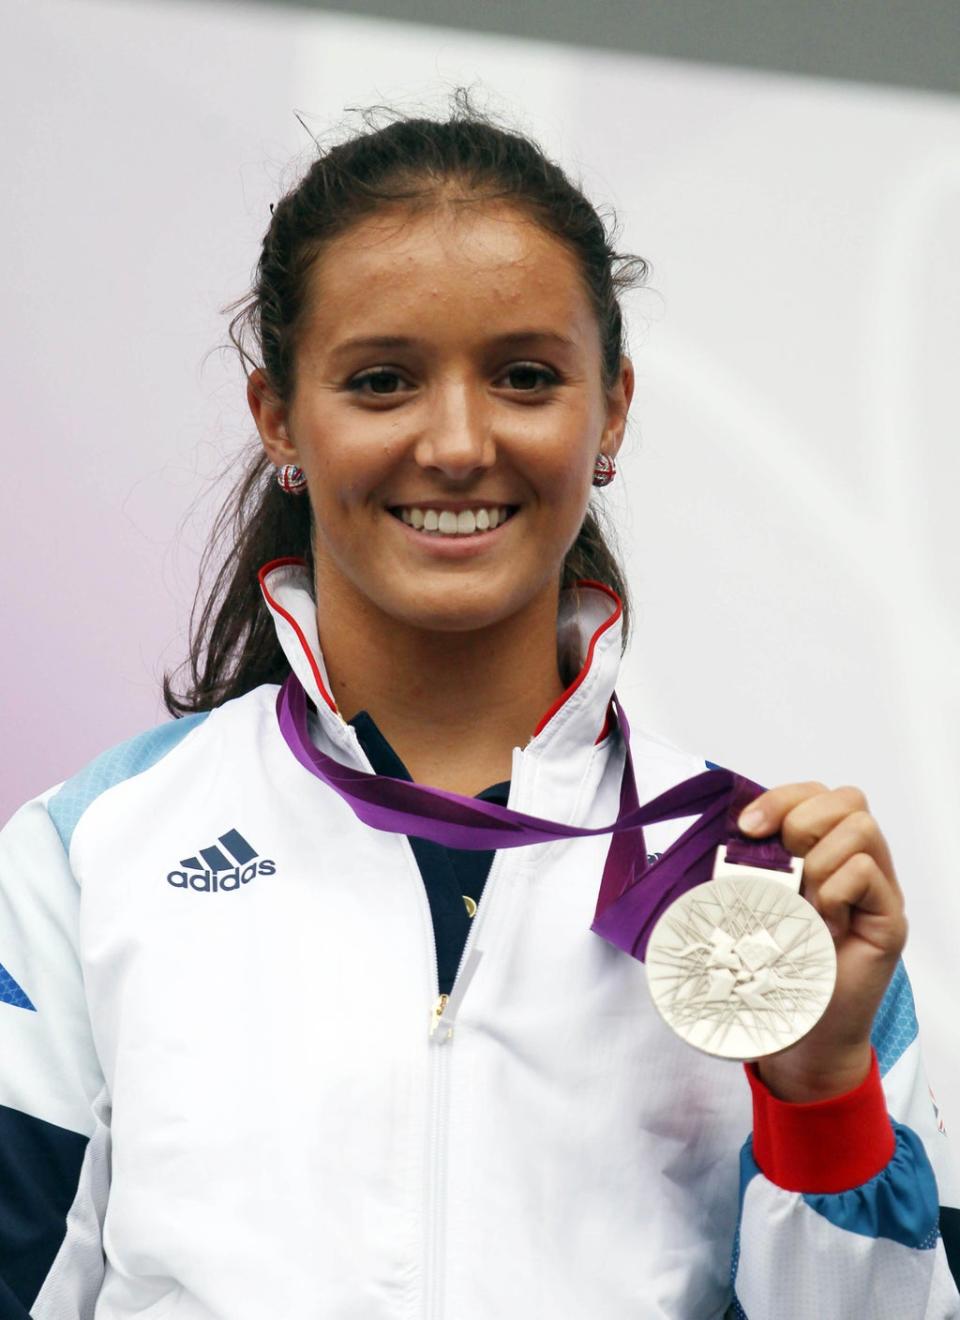 Laura Robson won a silver medal with Andy Murray at the 2012 Olympics (Lewis Whyld/PA) (PA Archive)